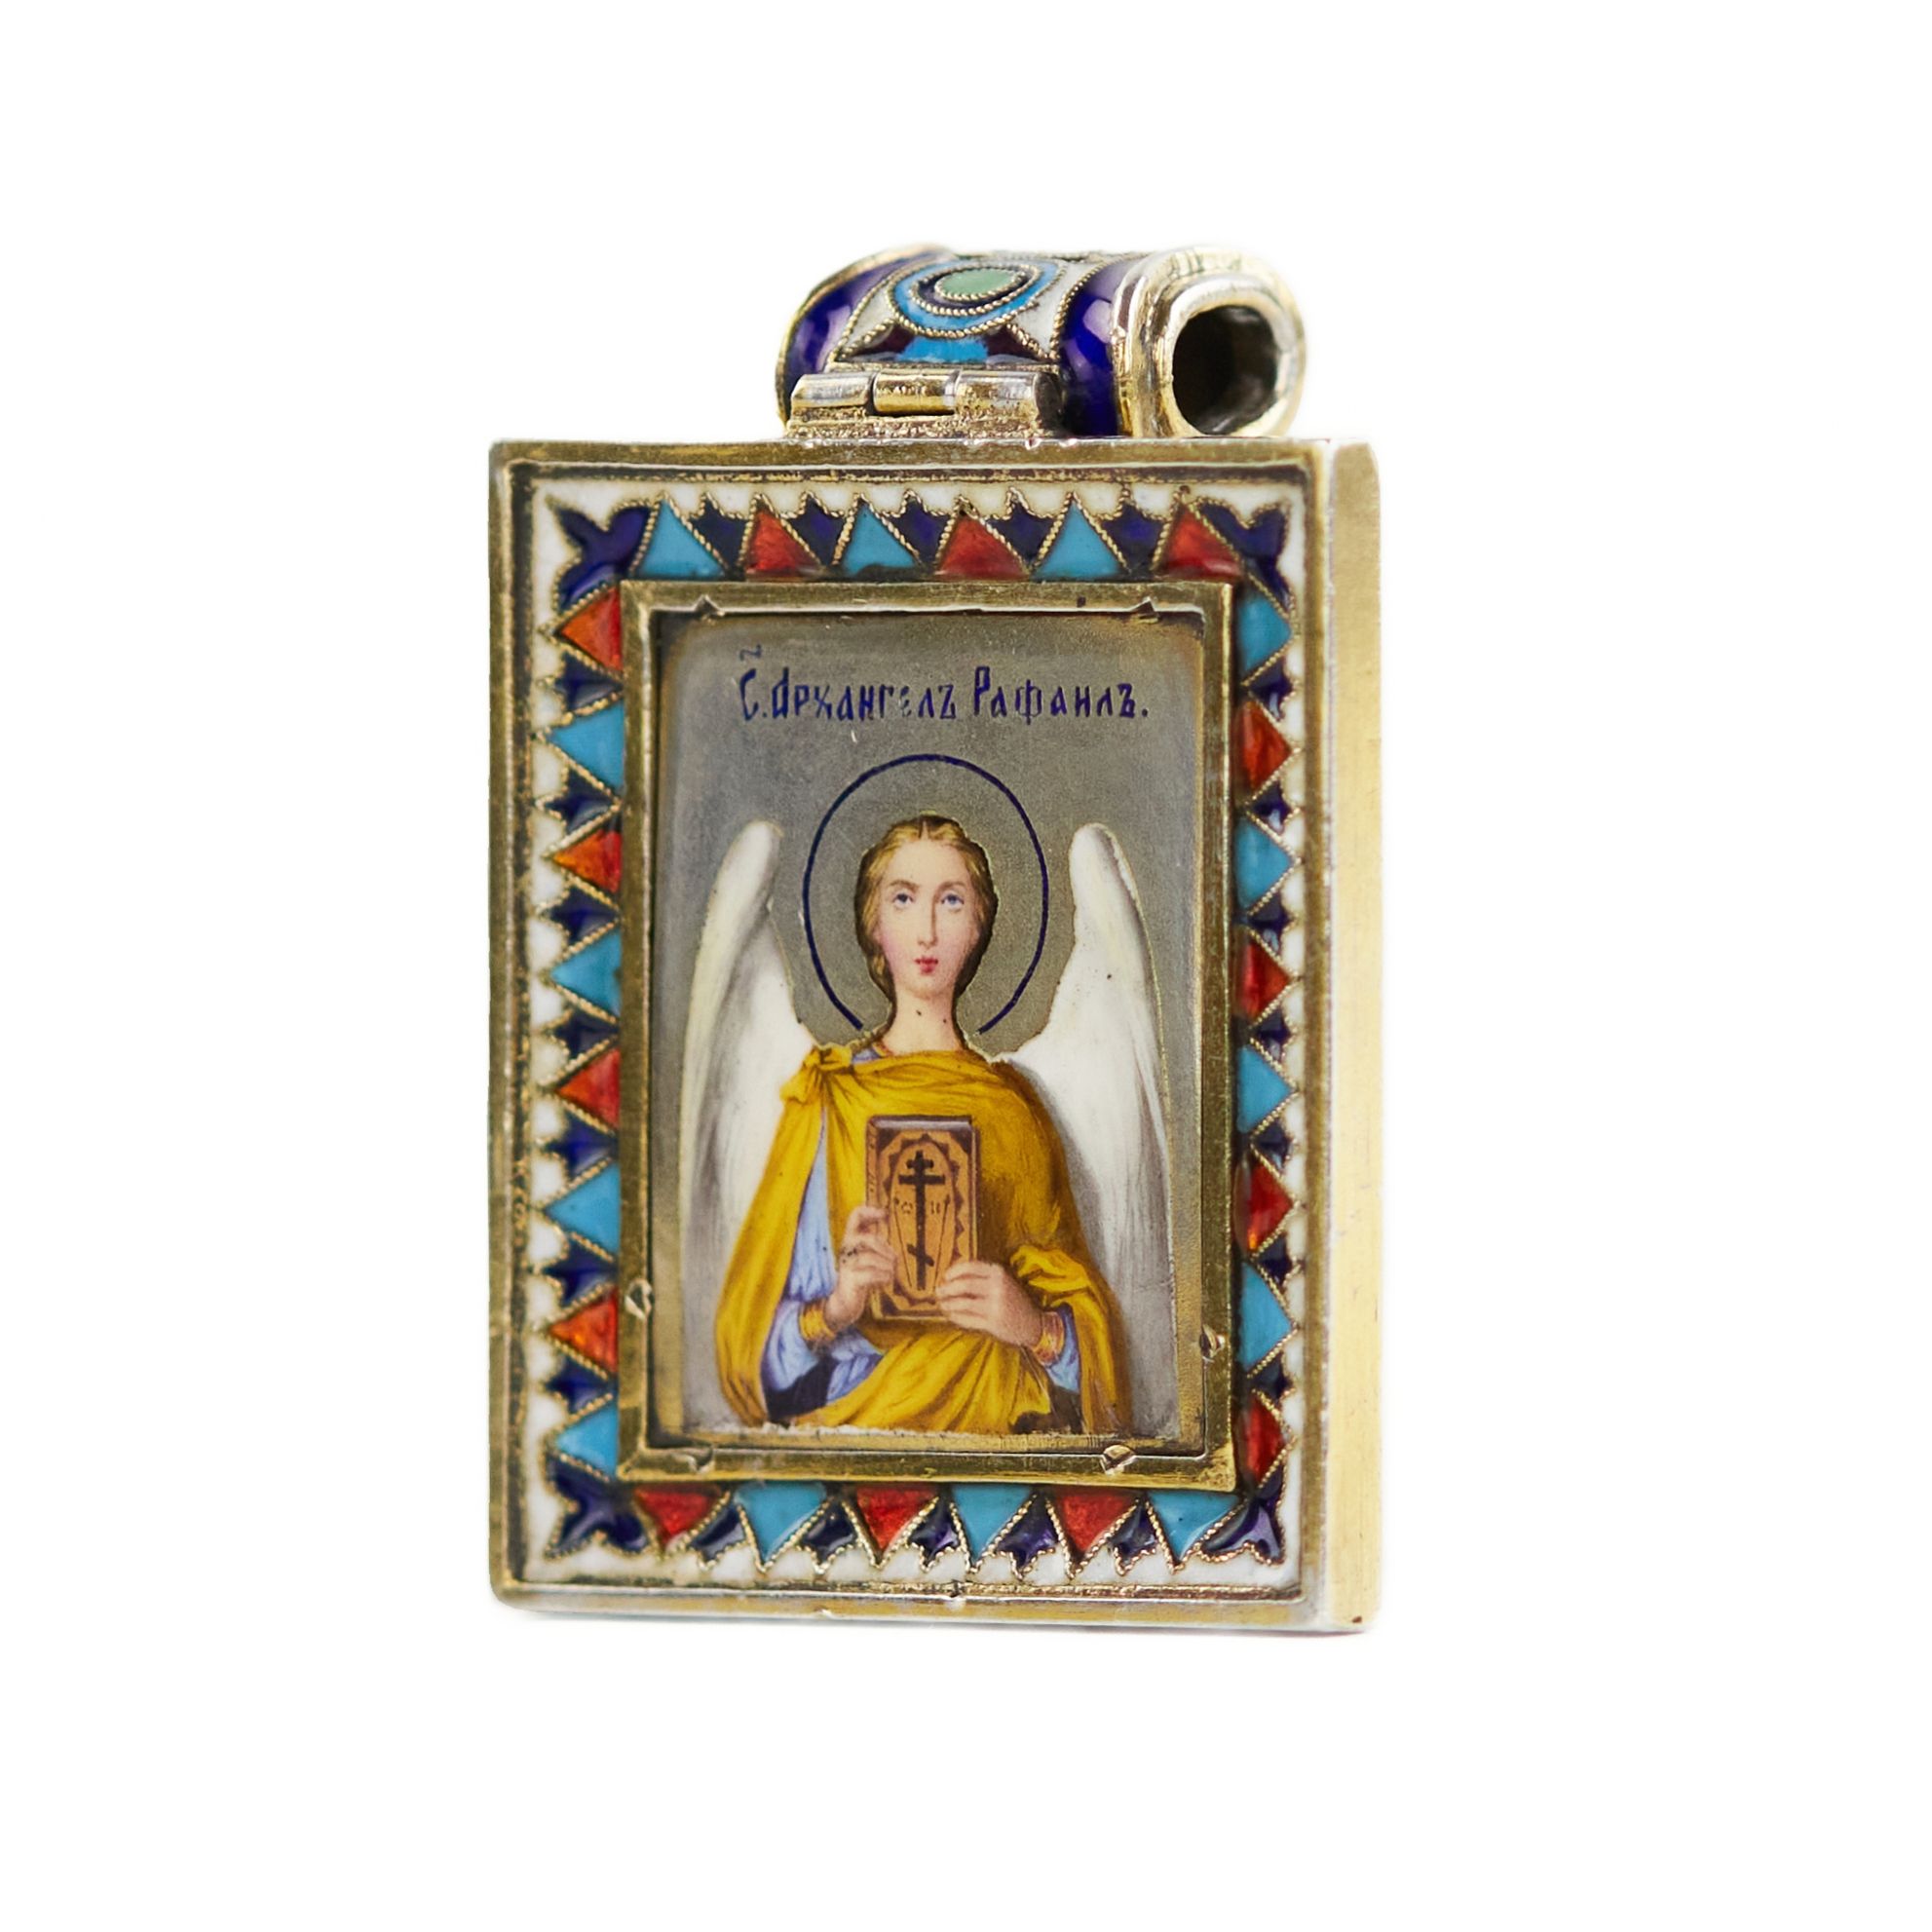 Russian, silver icon of the Archangel Raphael, painted and cloisonne enamels. Late 19th century. - Image 2 of 4